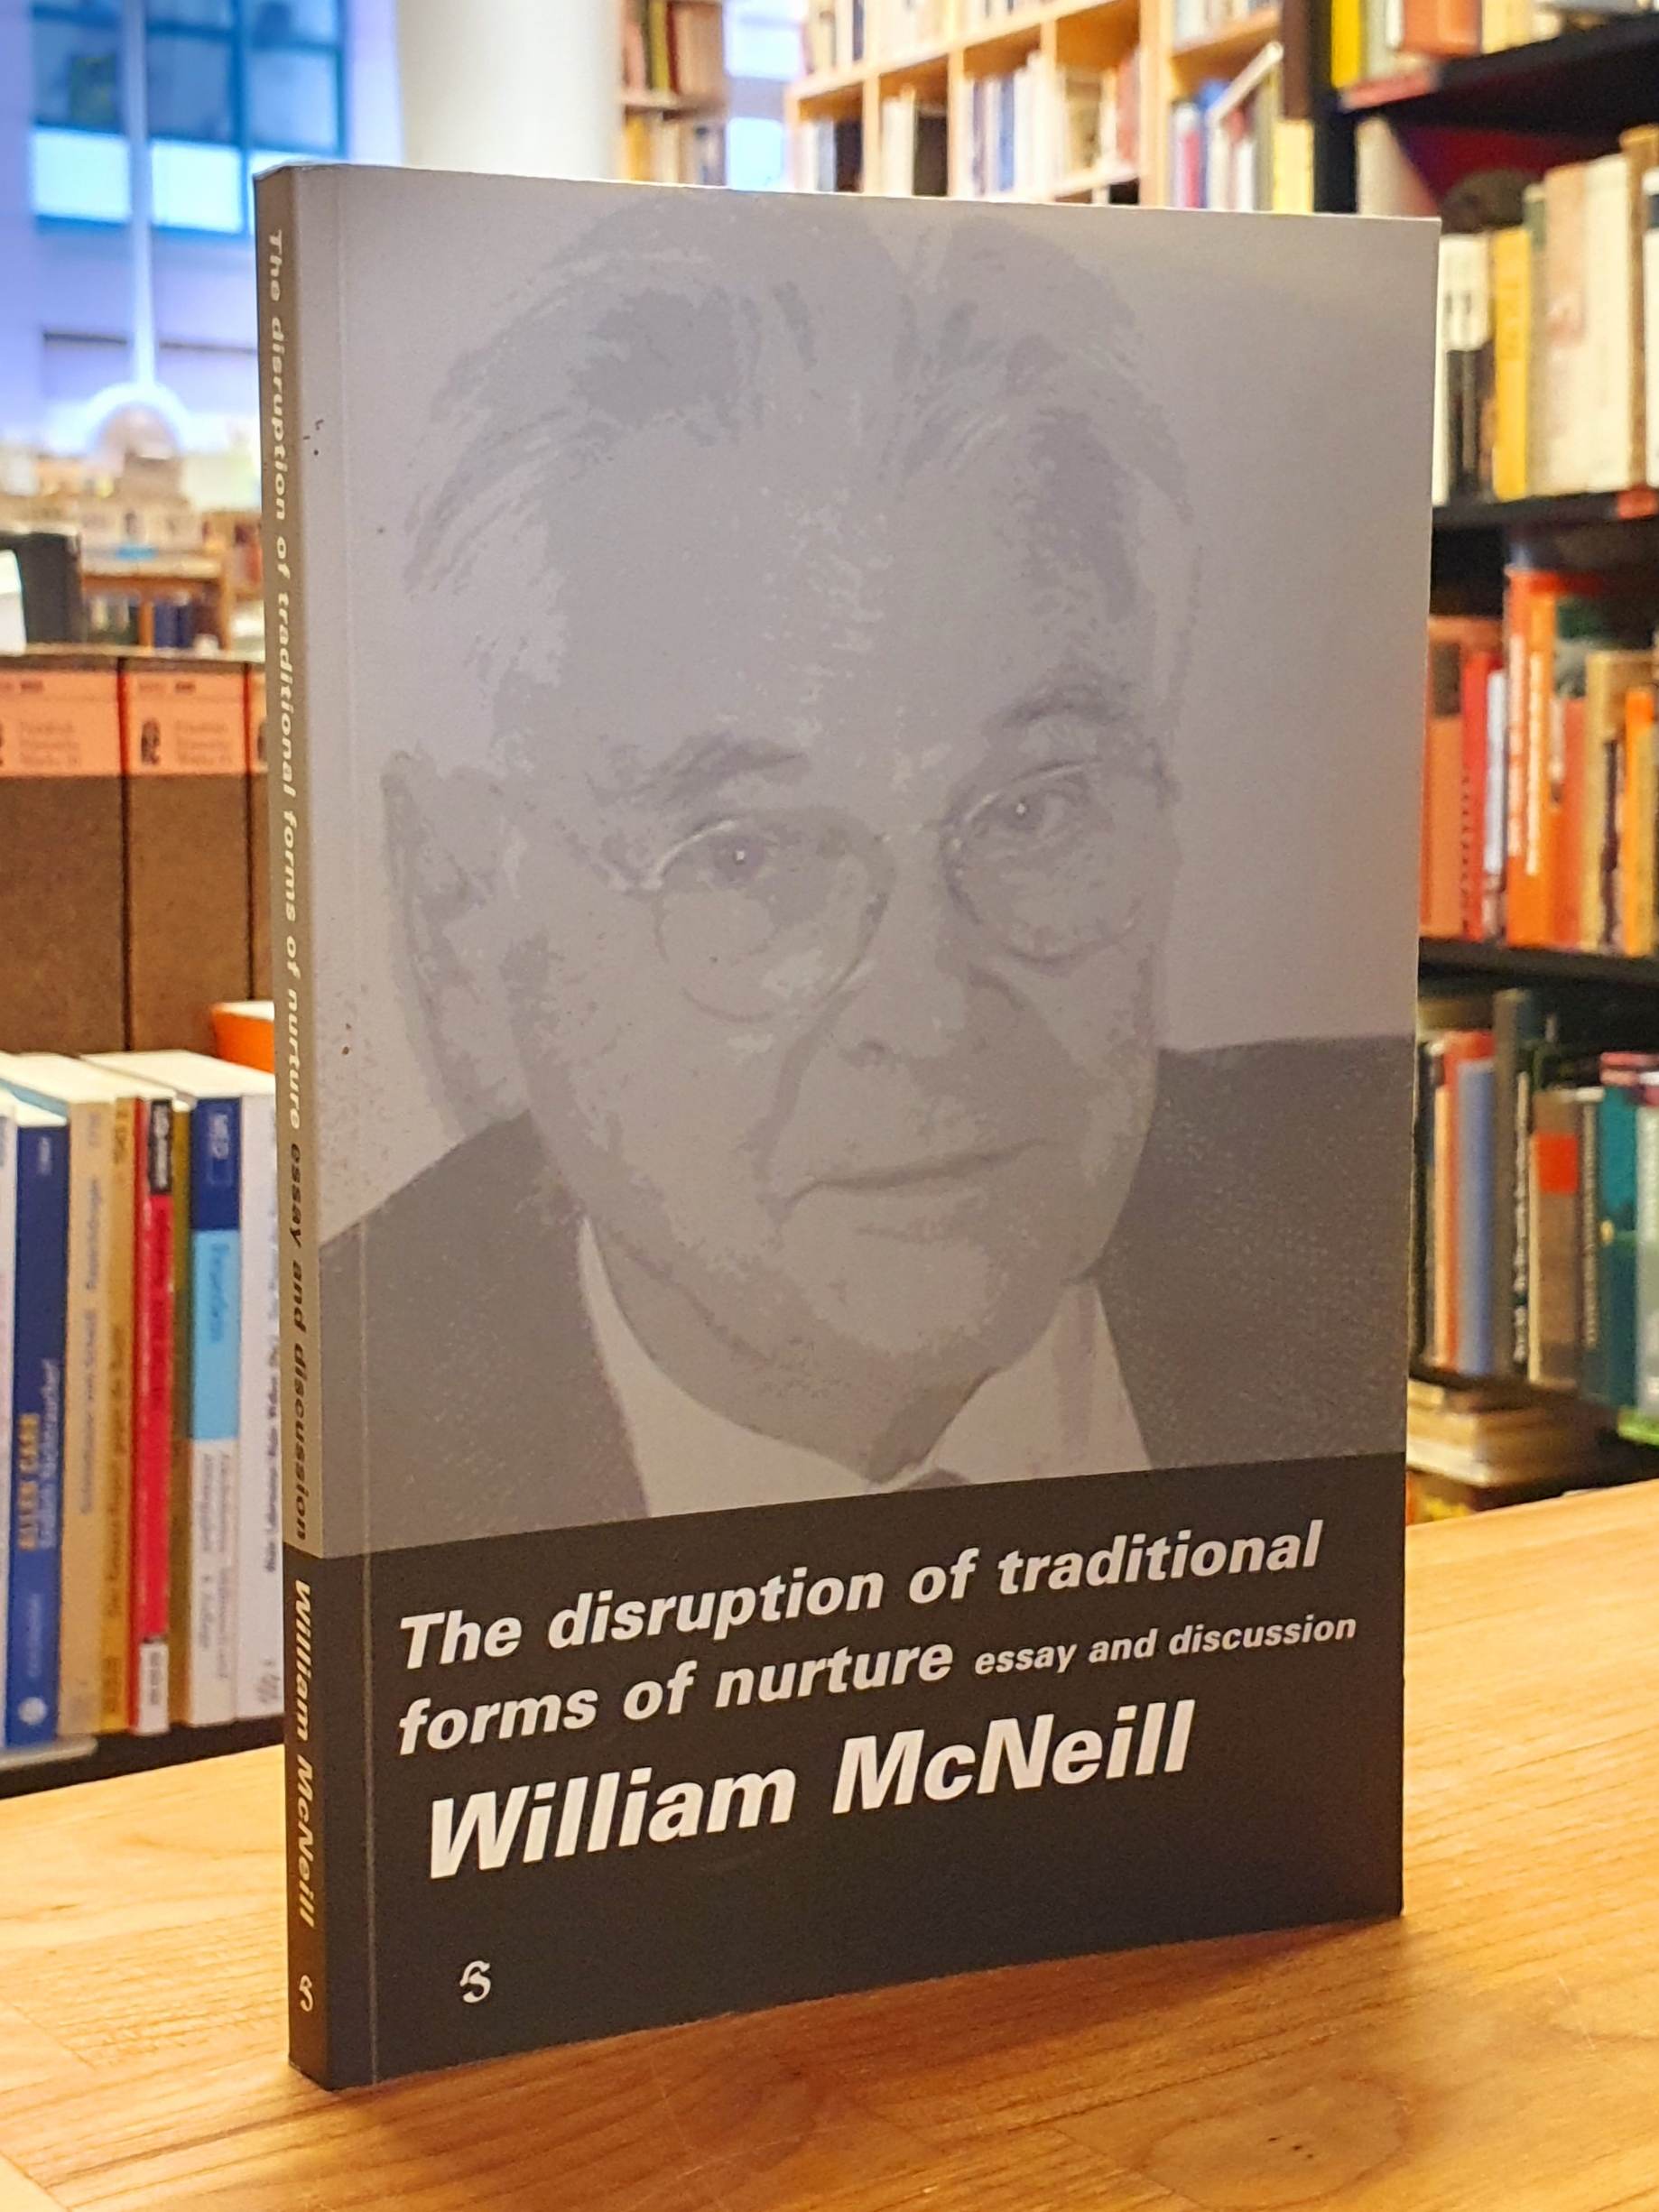 The Disruption of Traditional Forms of Nurture - Essay and Discussion, - McNeill, William,